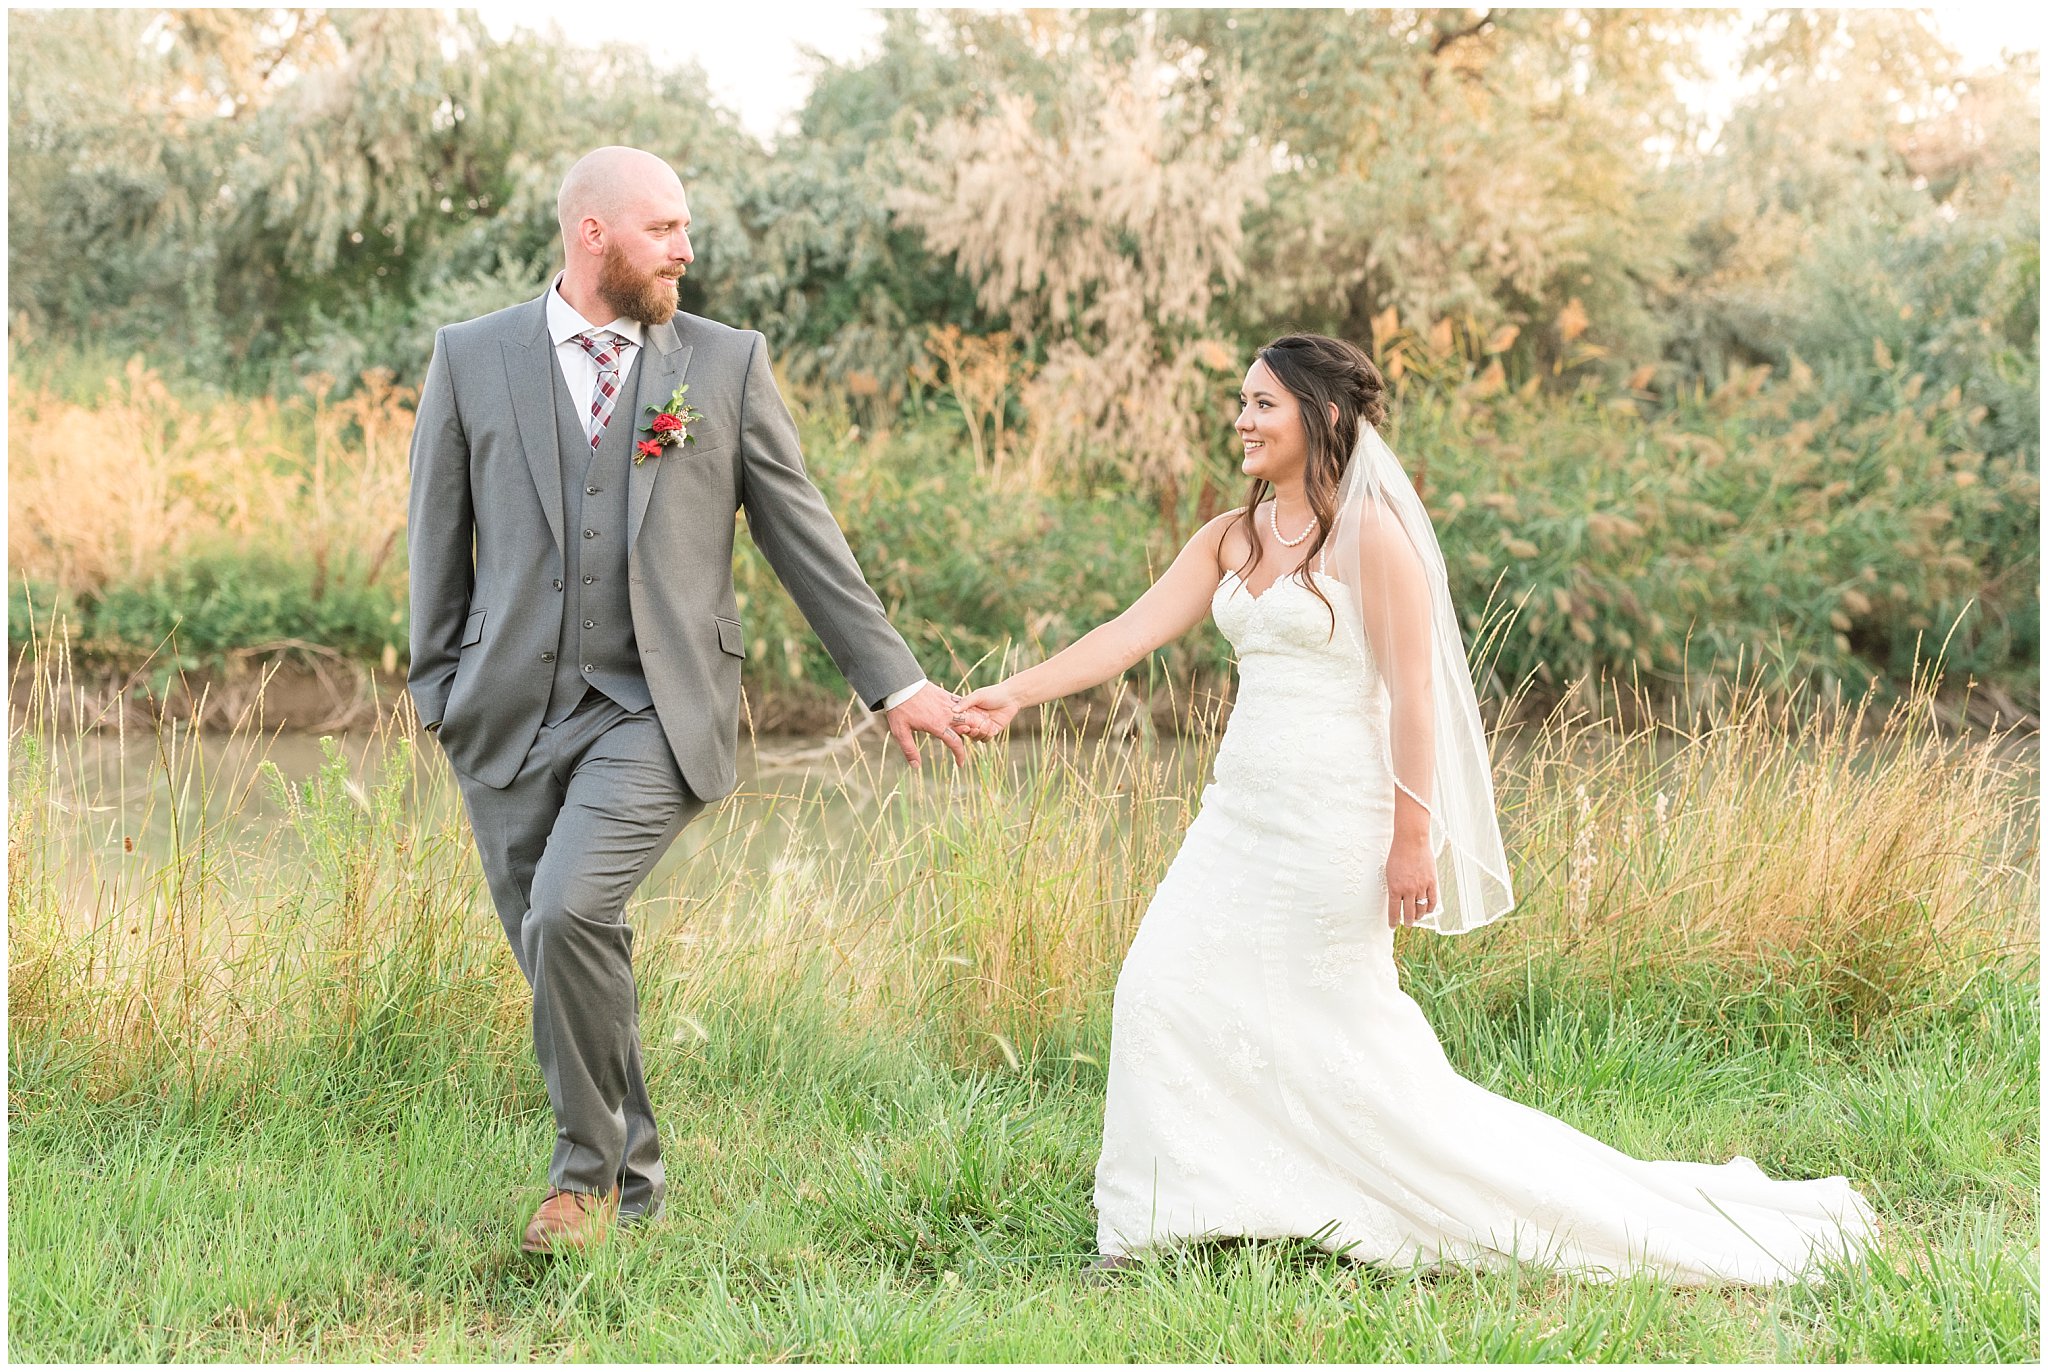 Bride and groom walking in a field during sunset portraits | Red and Grey wedding | Davis County Outdoor Wedding | Jessie and Dallin Photography